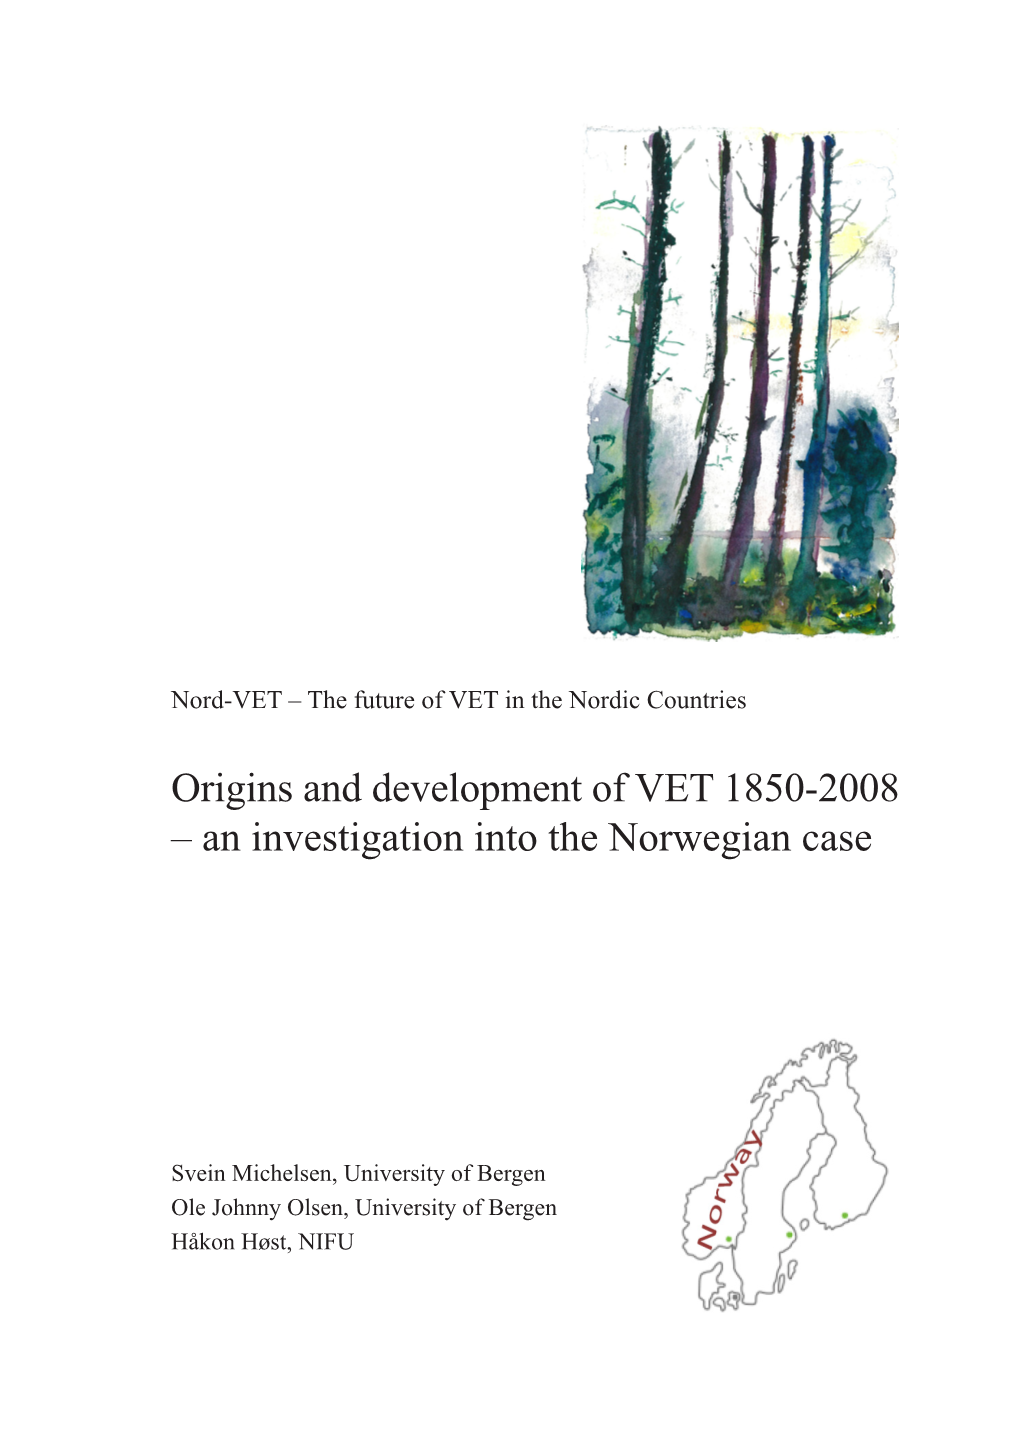 Origins and Development of VET 1850-2008 – an Investigation Into the Norwegian Case